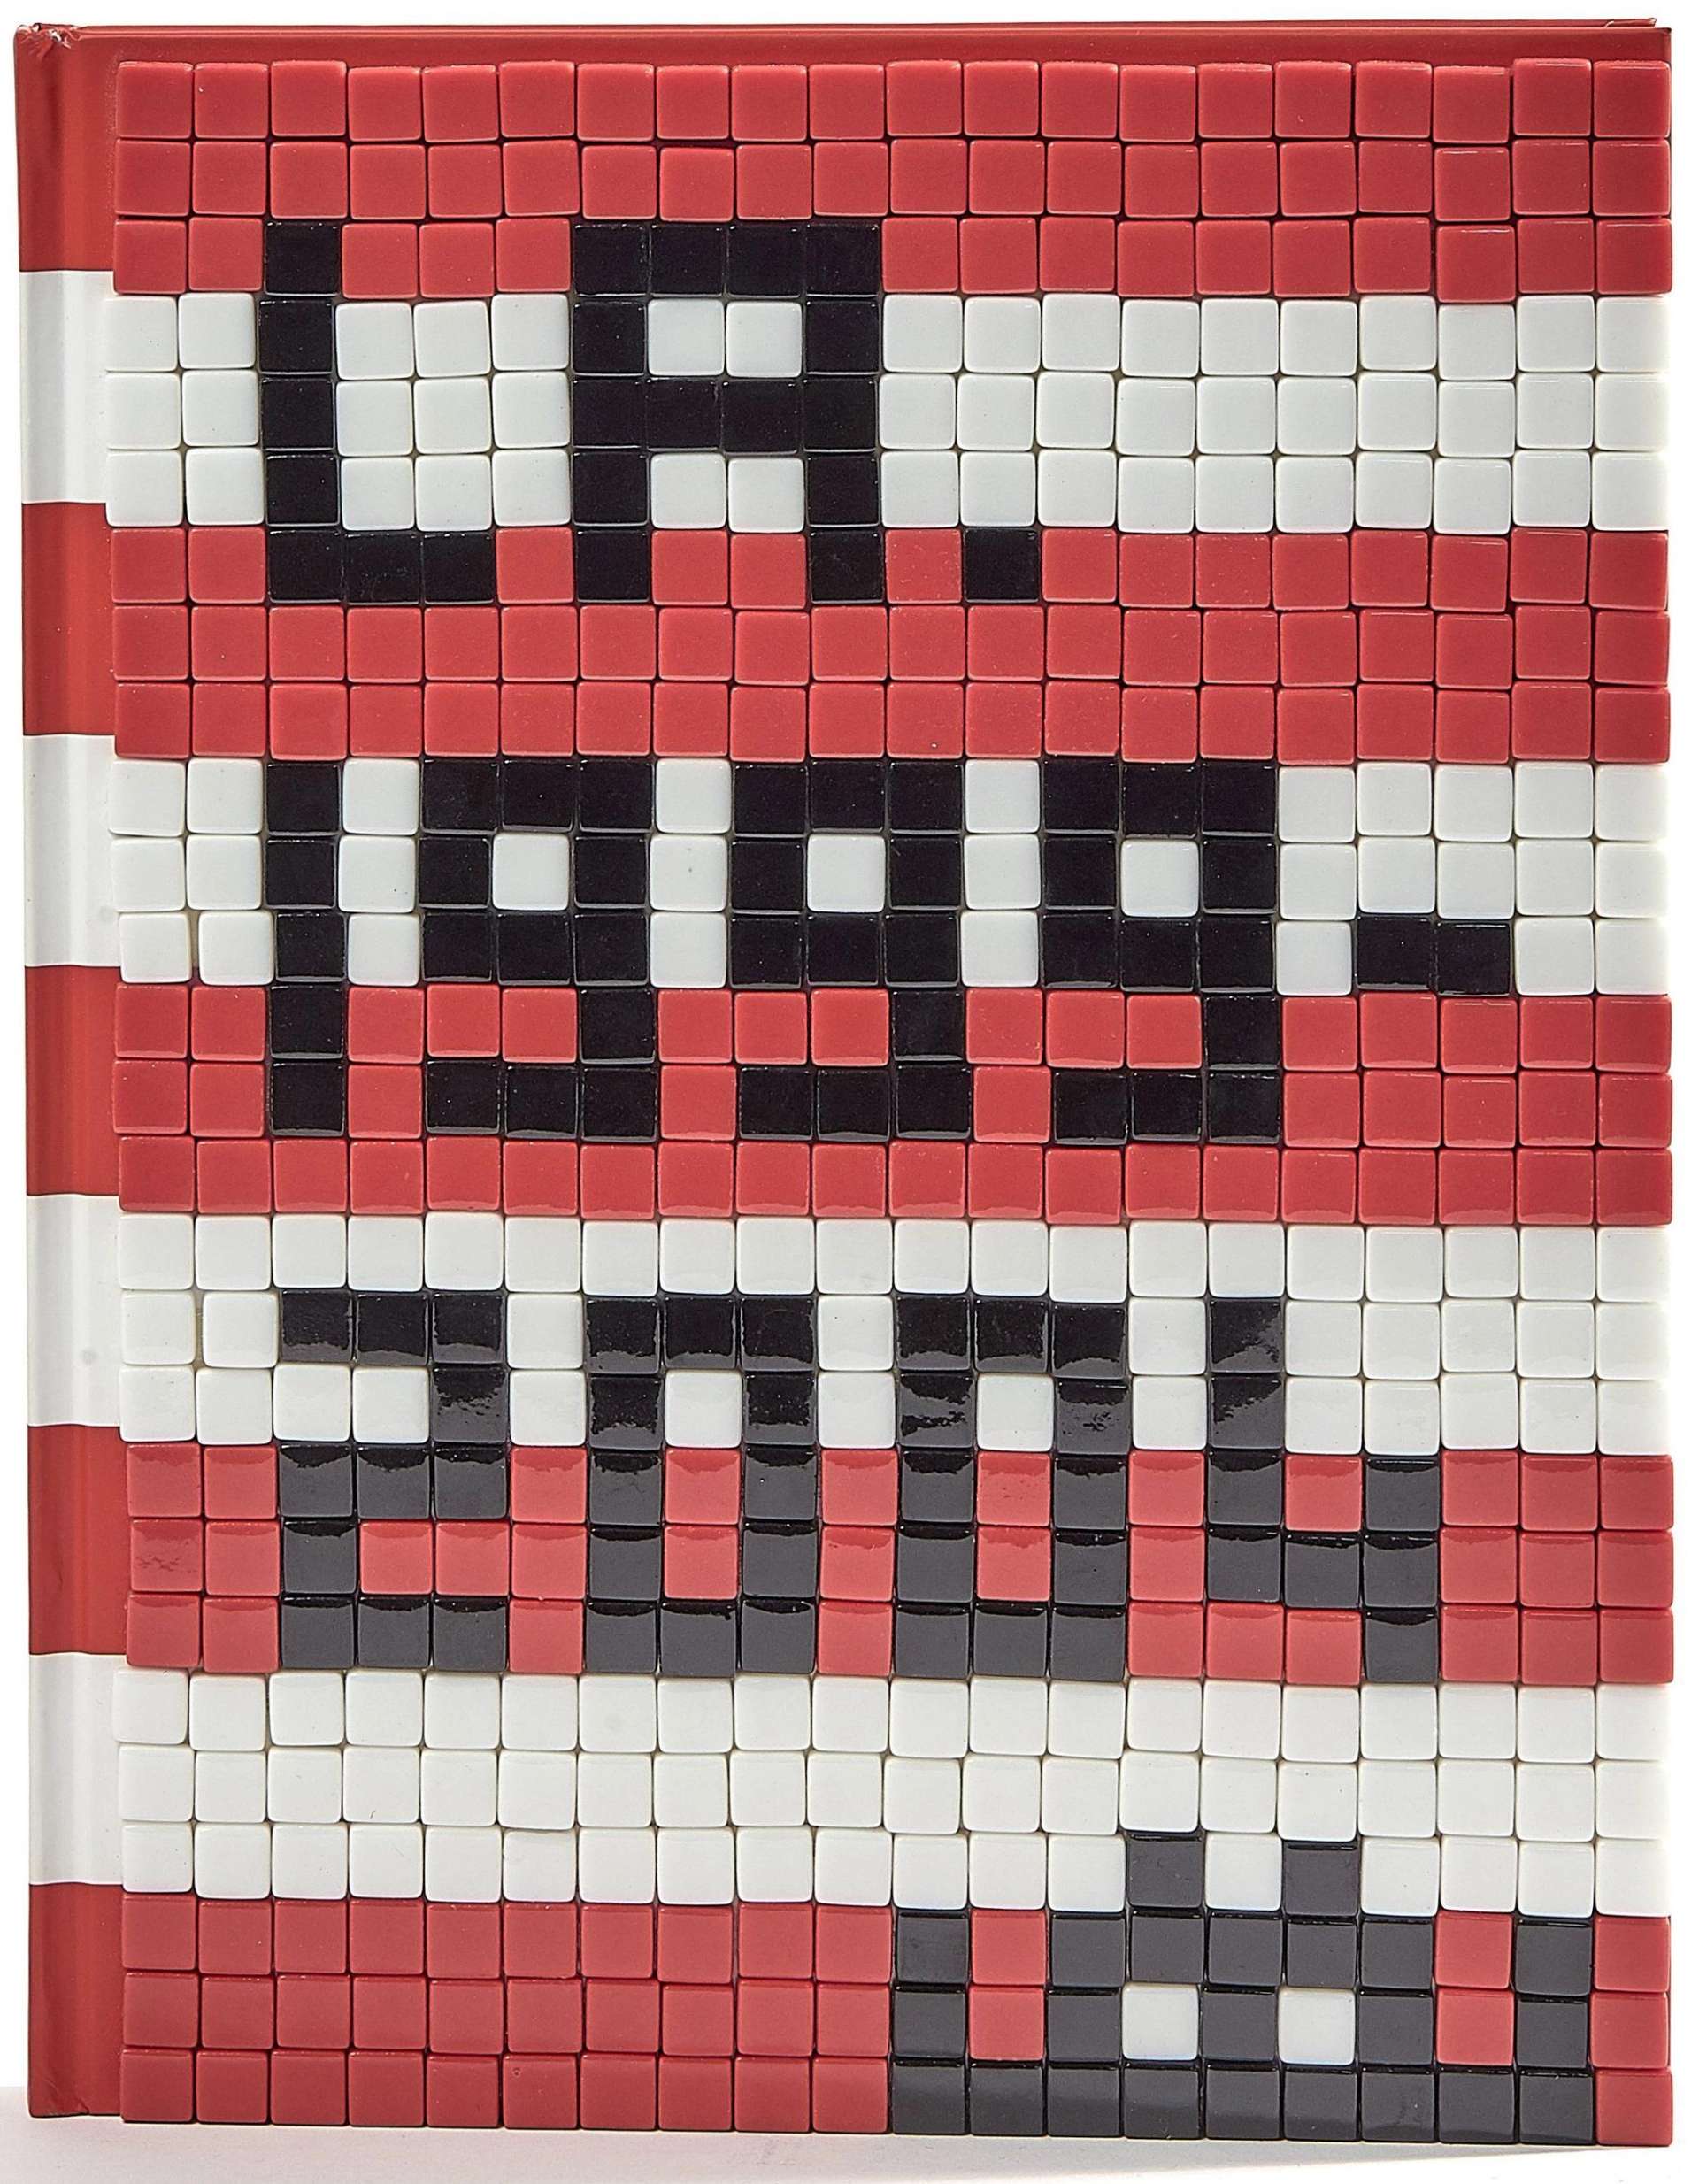 Invasion Guide 02, Los Angeles / Mission Hollywood by Invader